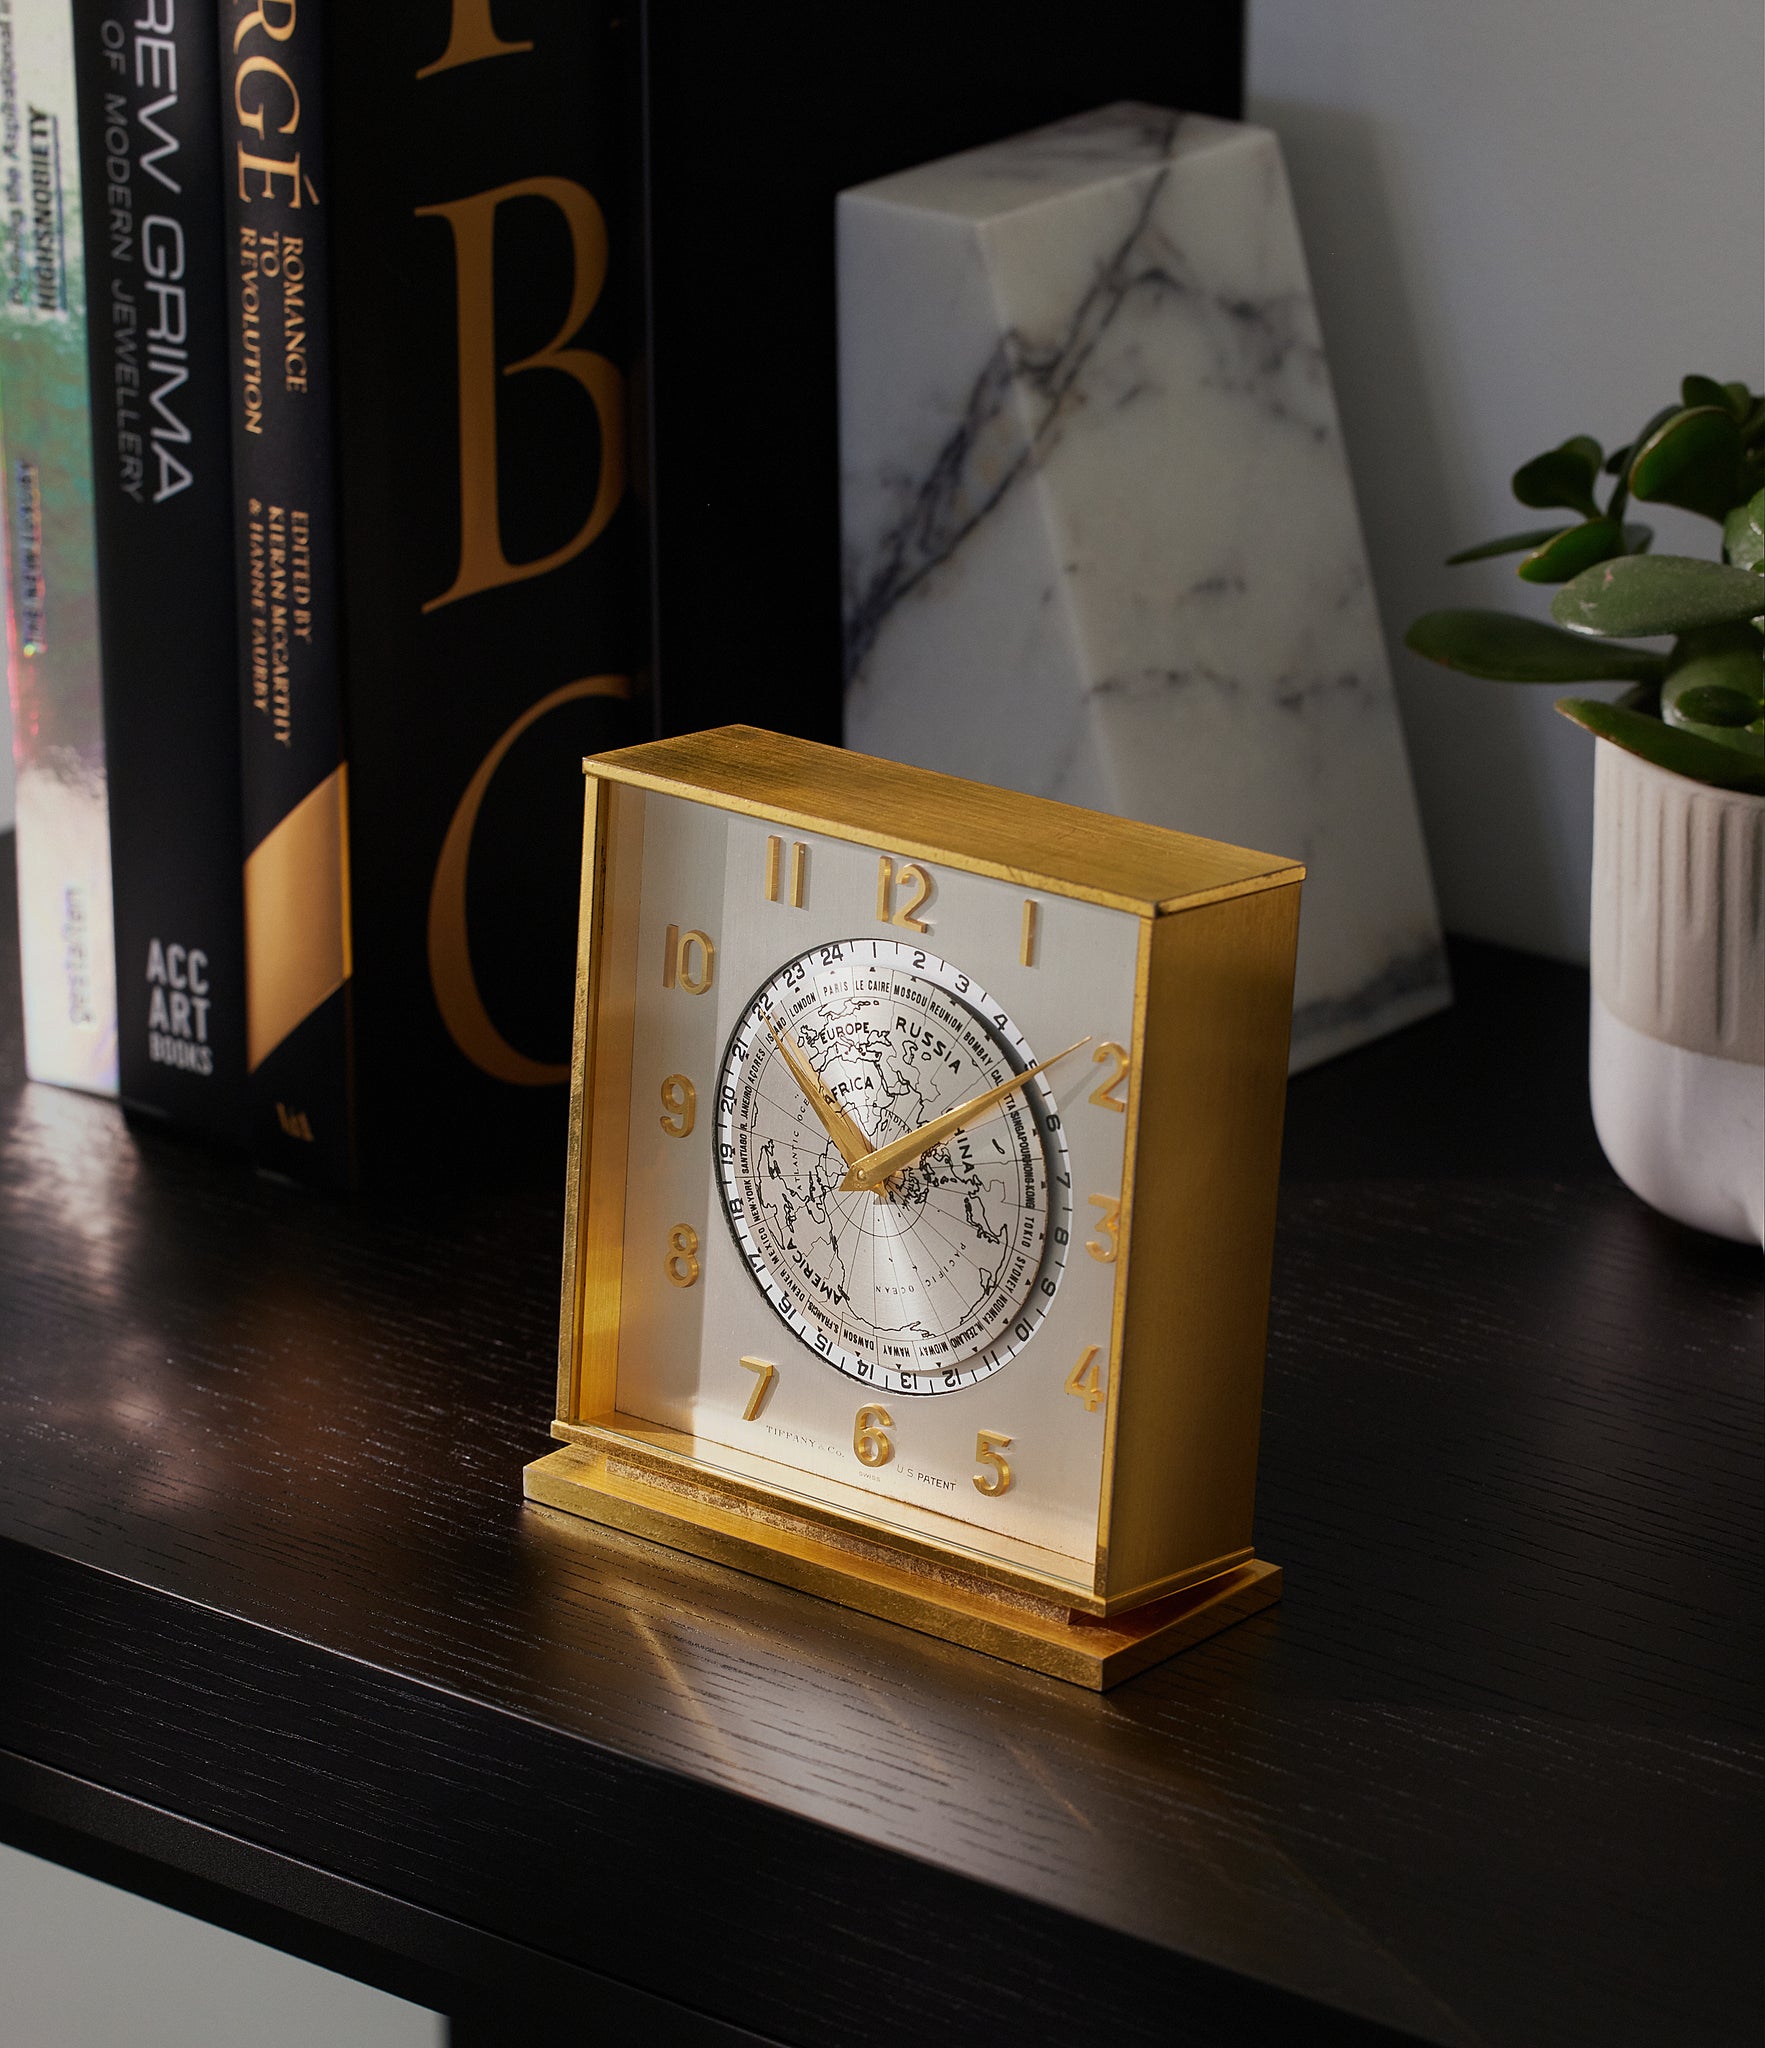 Tiffany & Co by Imexal World Time Desk Clock | Gilt Brass | Buy rare collectables at A Collected Man London